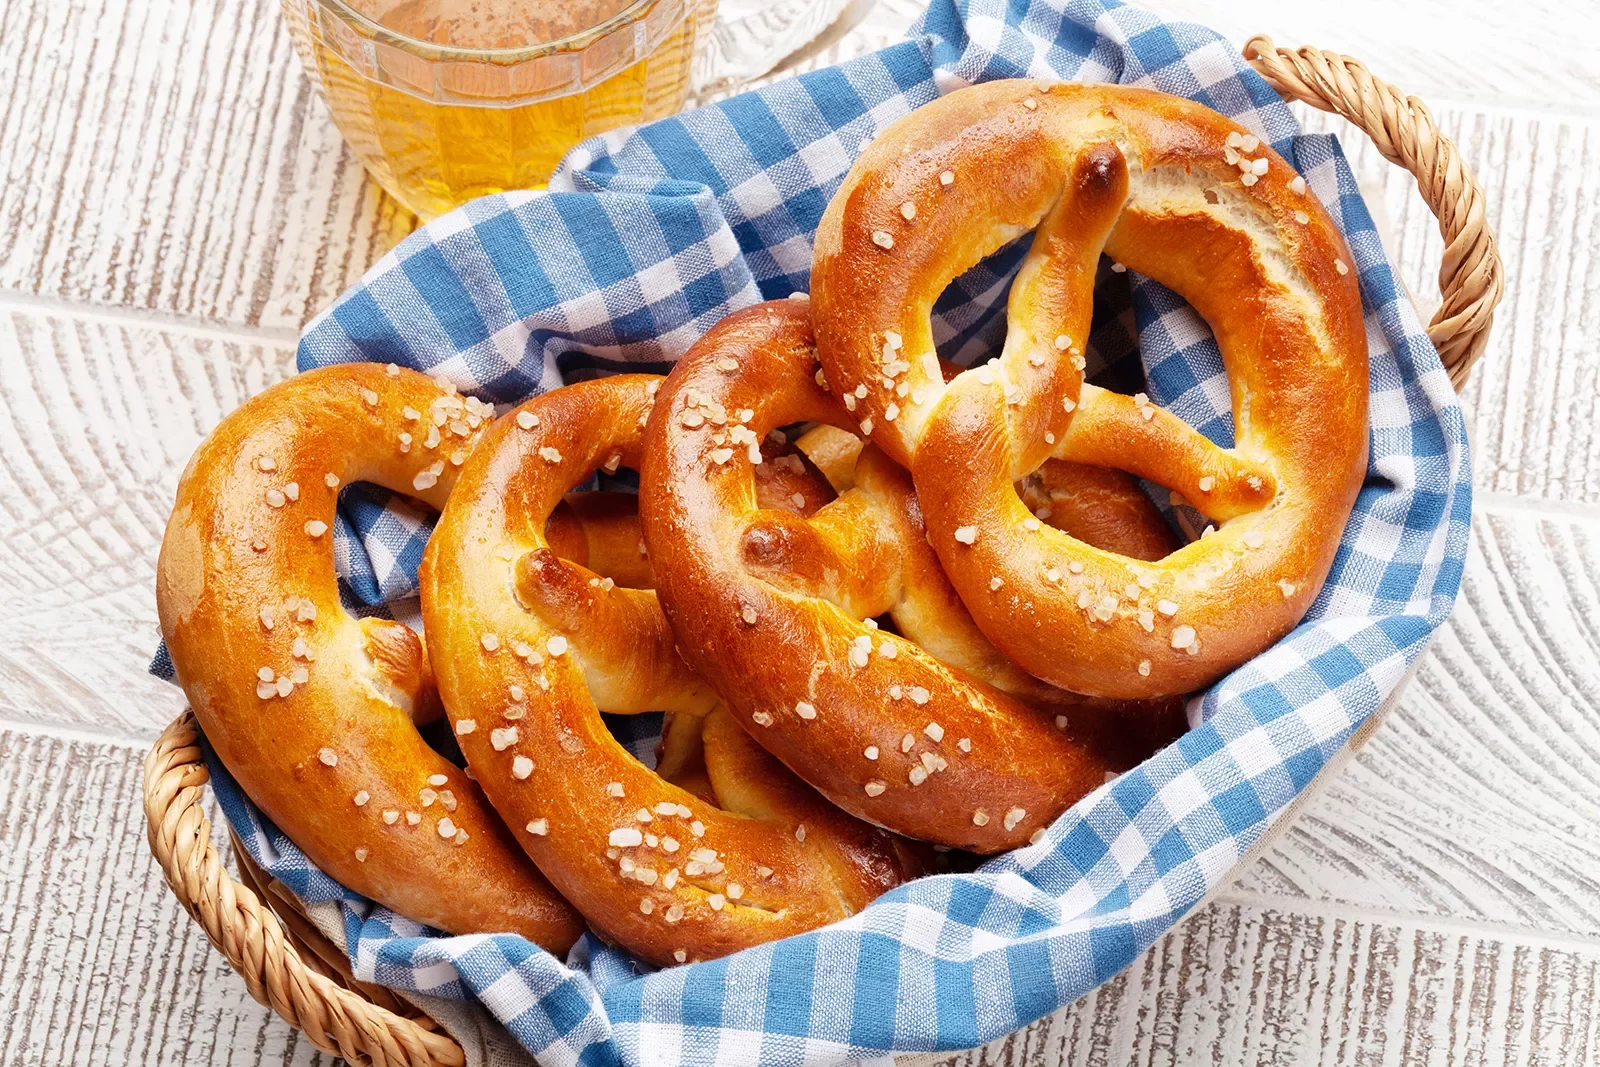 Lager beer mug and fresh baked homemade pretzel with sea salt on wooden table. Classic beer snack